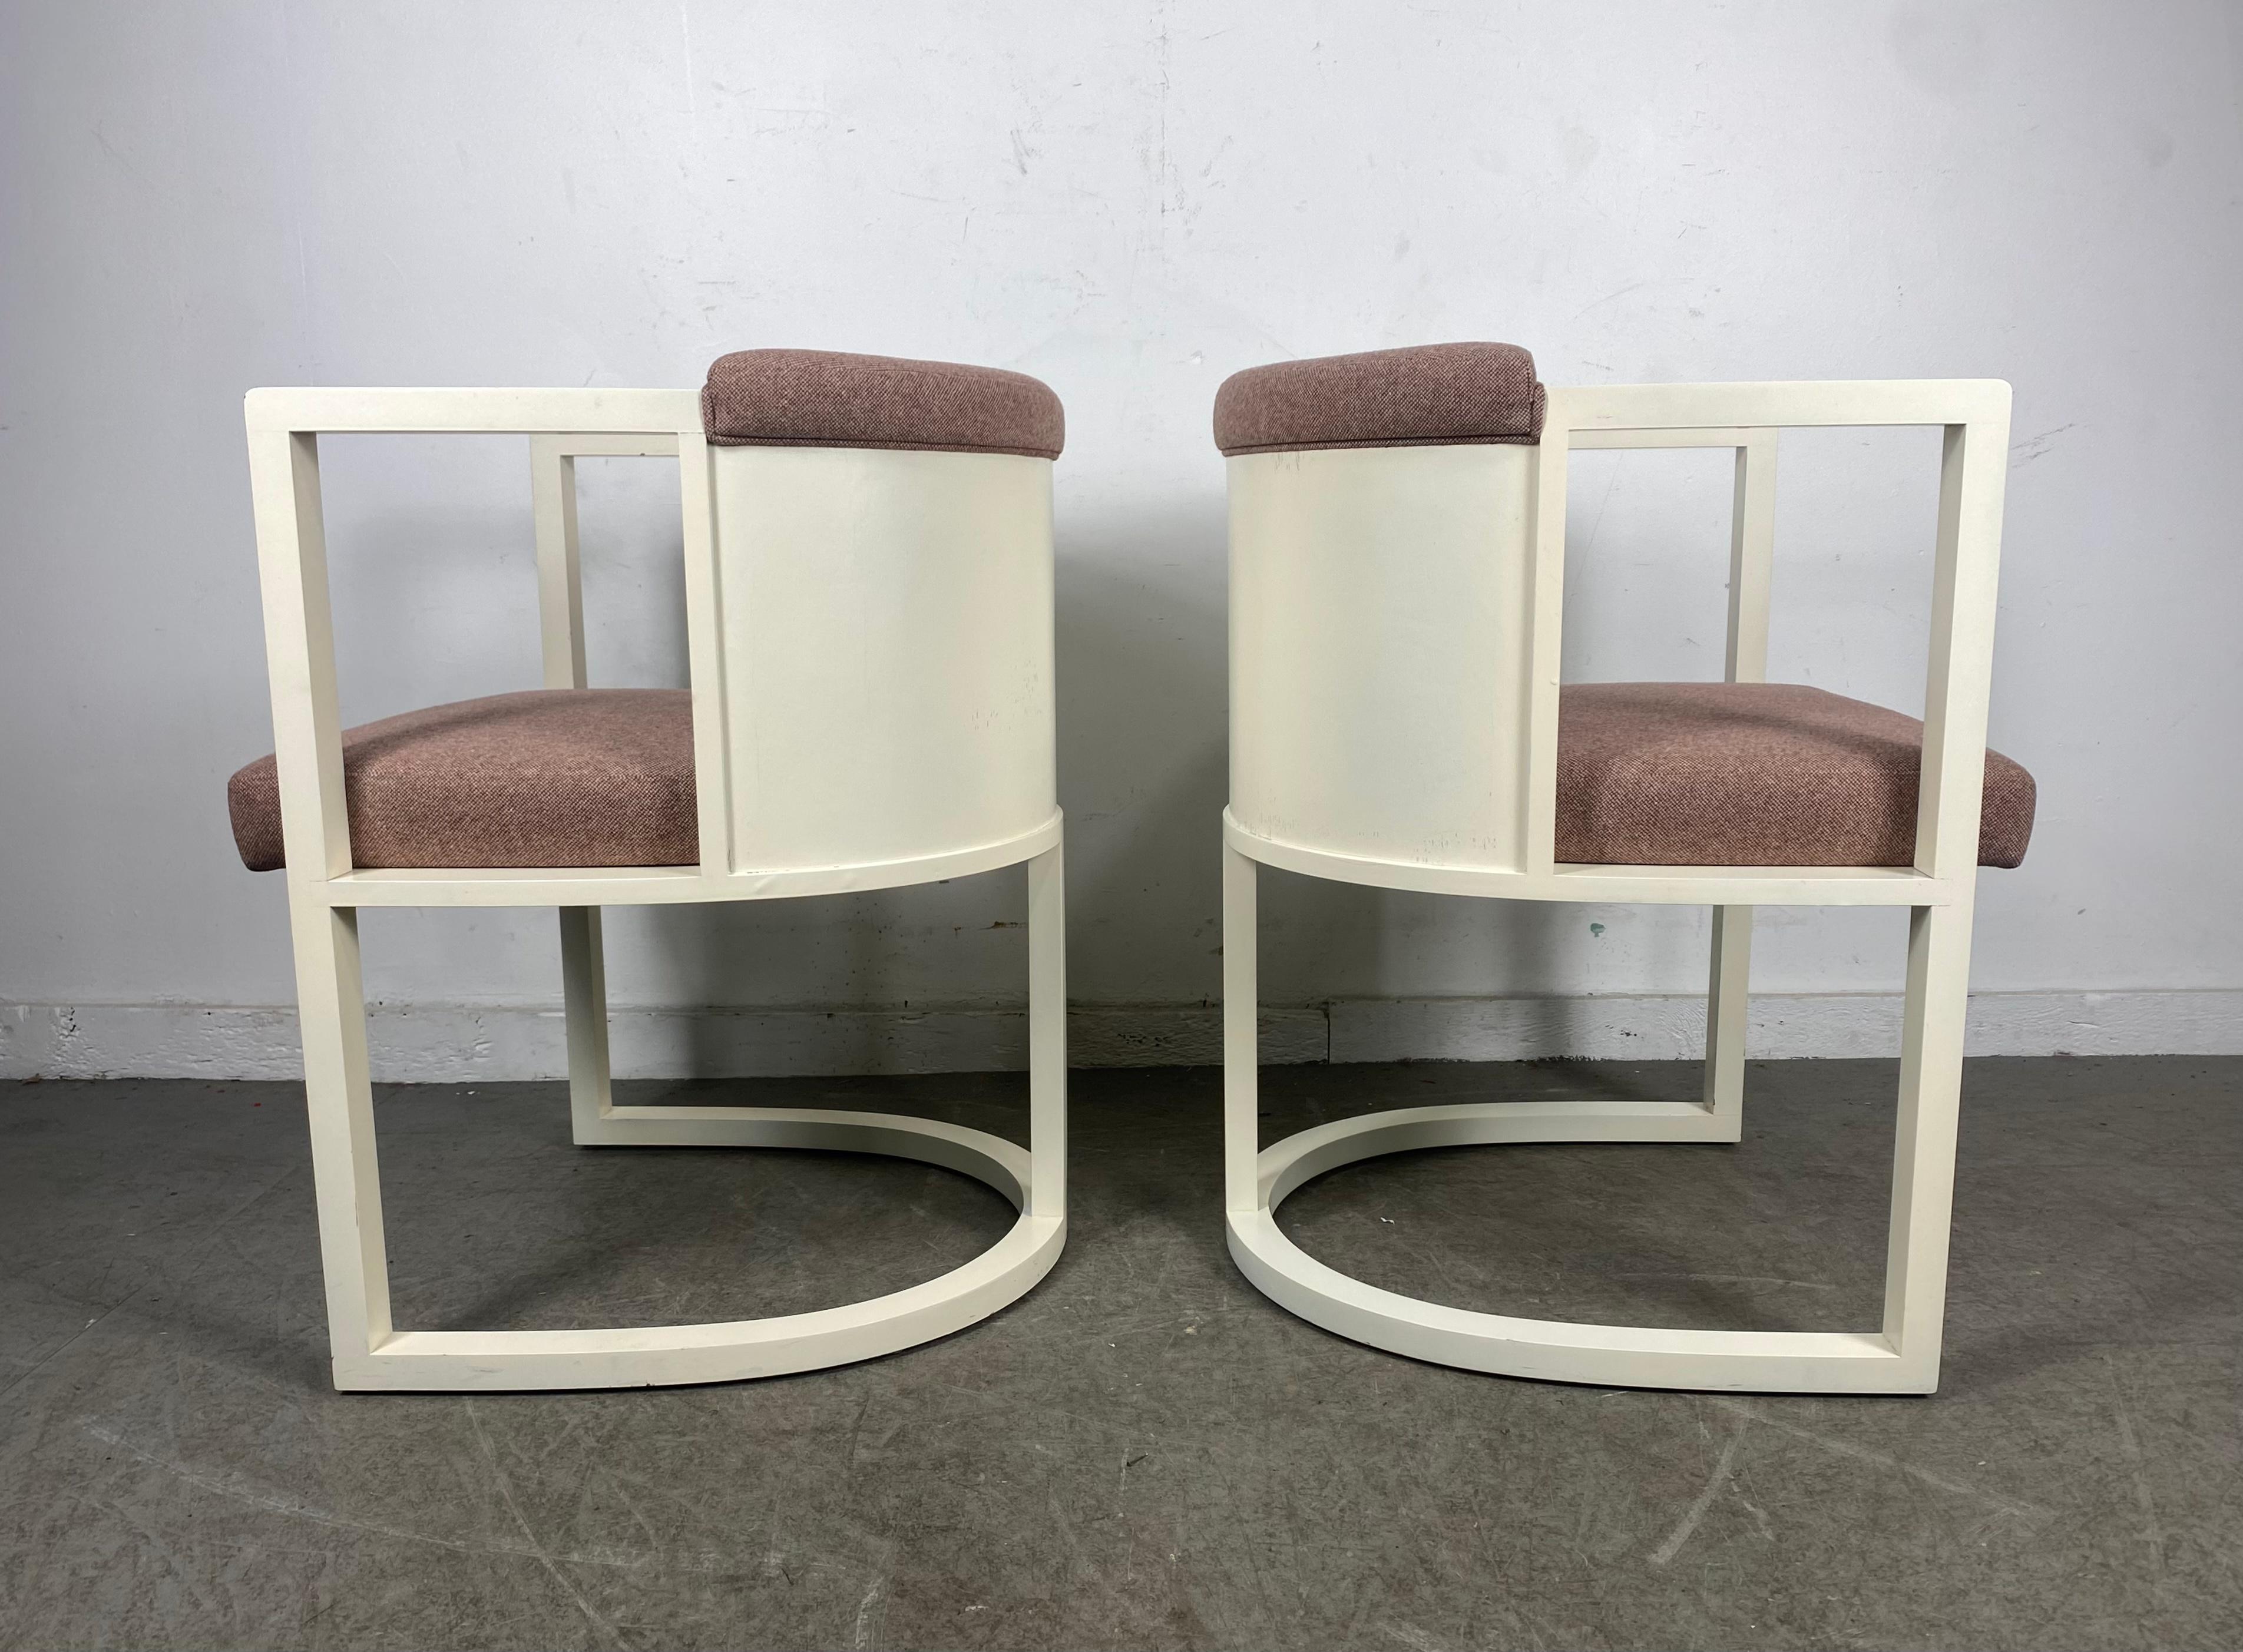 Set of 6 avaliable!!Classic Art Deco style, bauhaus arm chairs in the manner of Josef Hoffmann,,Can be used as lounge, occasional chairs or dining chairs.Retains original white lacquer finish ..also original wool upholstery..Great design.Extremely